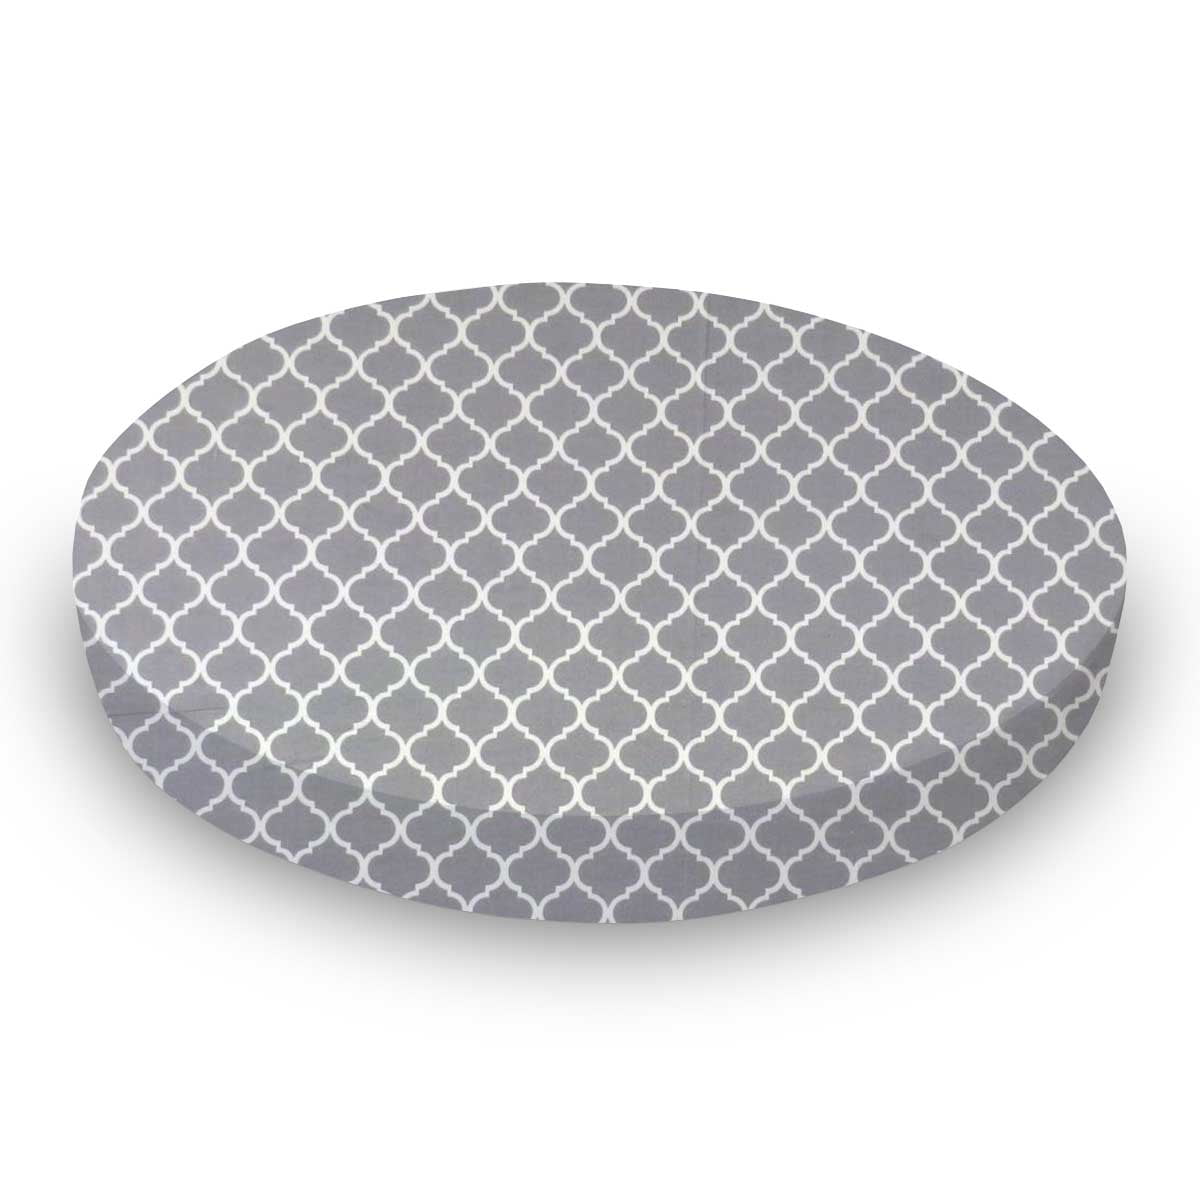 SheetWorld Fitted 100% Cotton Percale Oval Crib Sheet, Fits Stokke ...